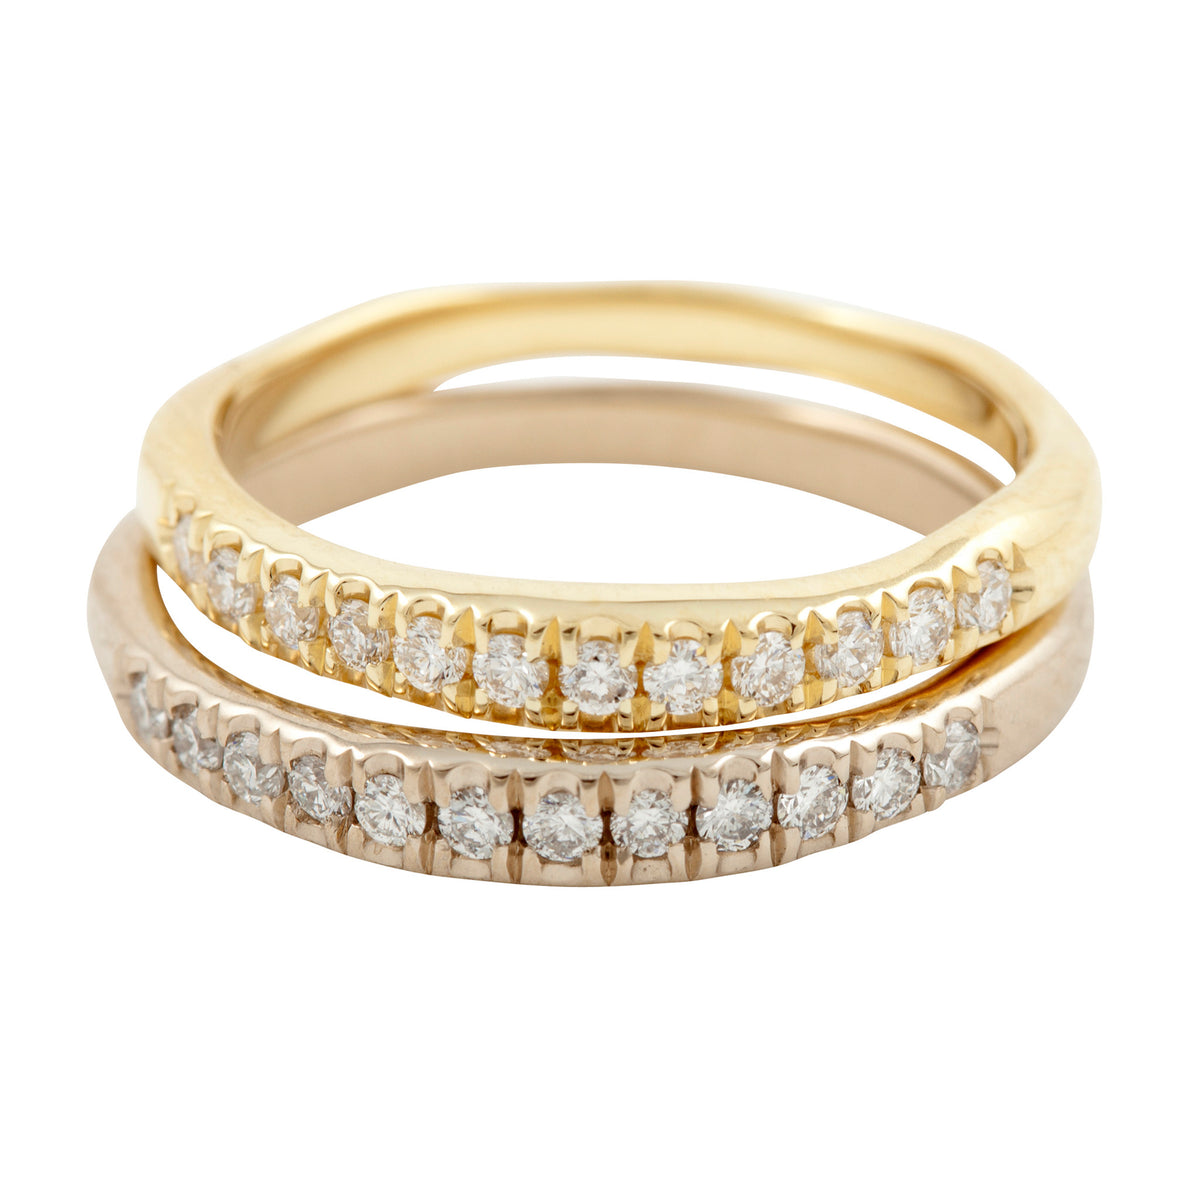 Wedding Ring with 12 Diamonds in 18ct Yellow or 18ct White Gold